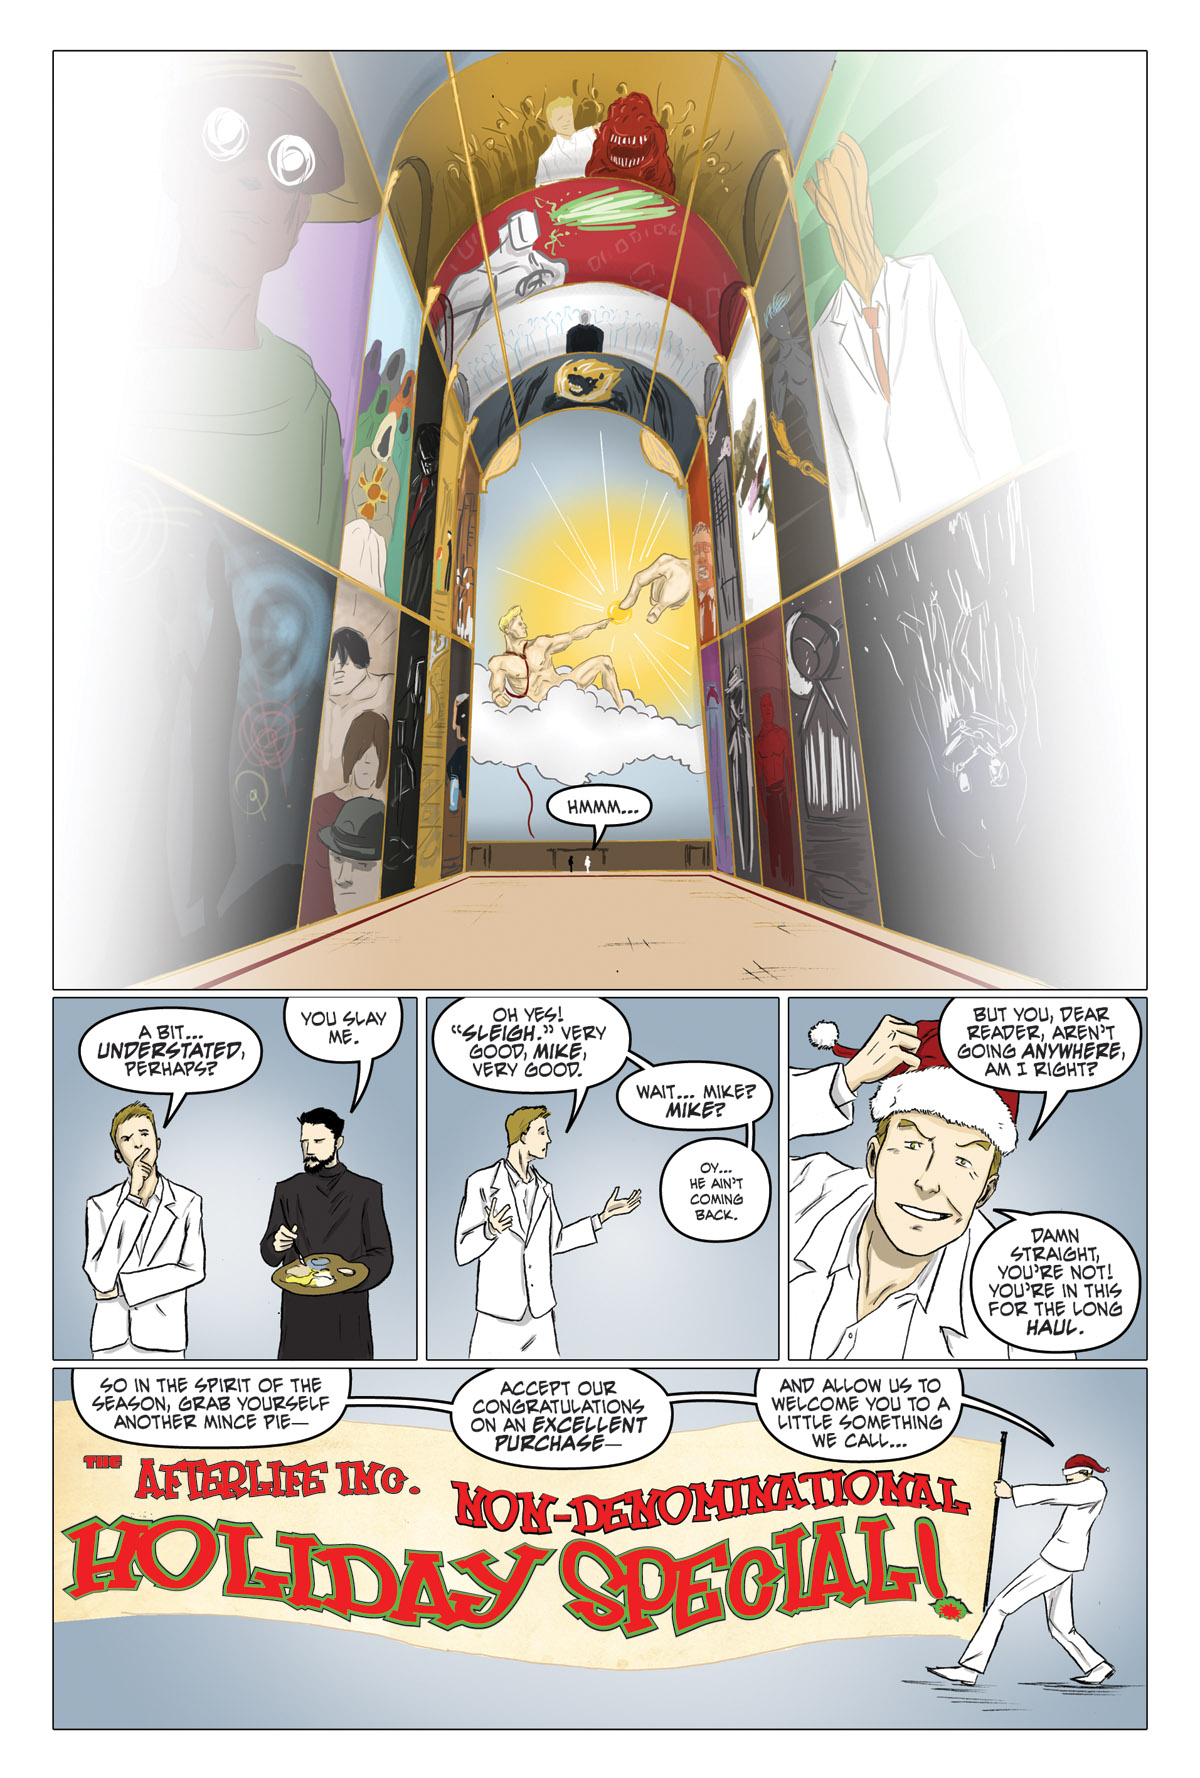 Afterlife Inc. | Holiday Special 2011 | Page 1